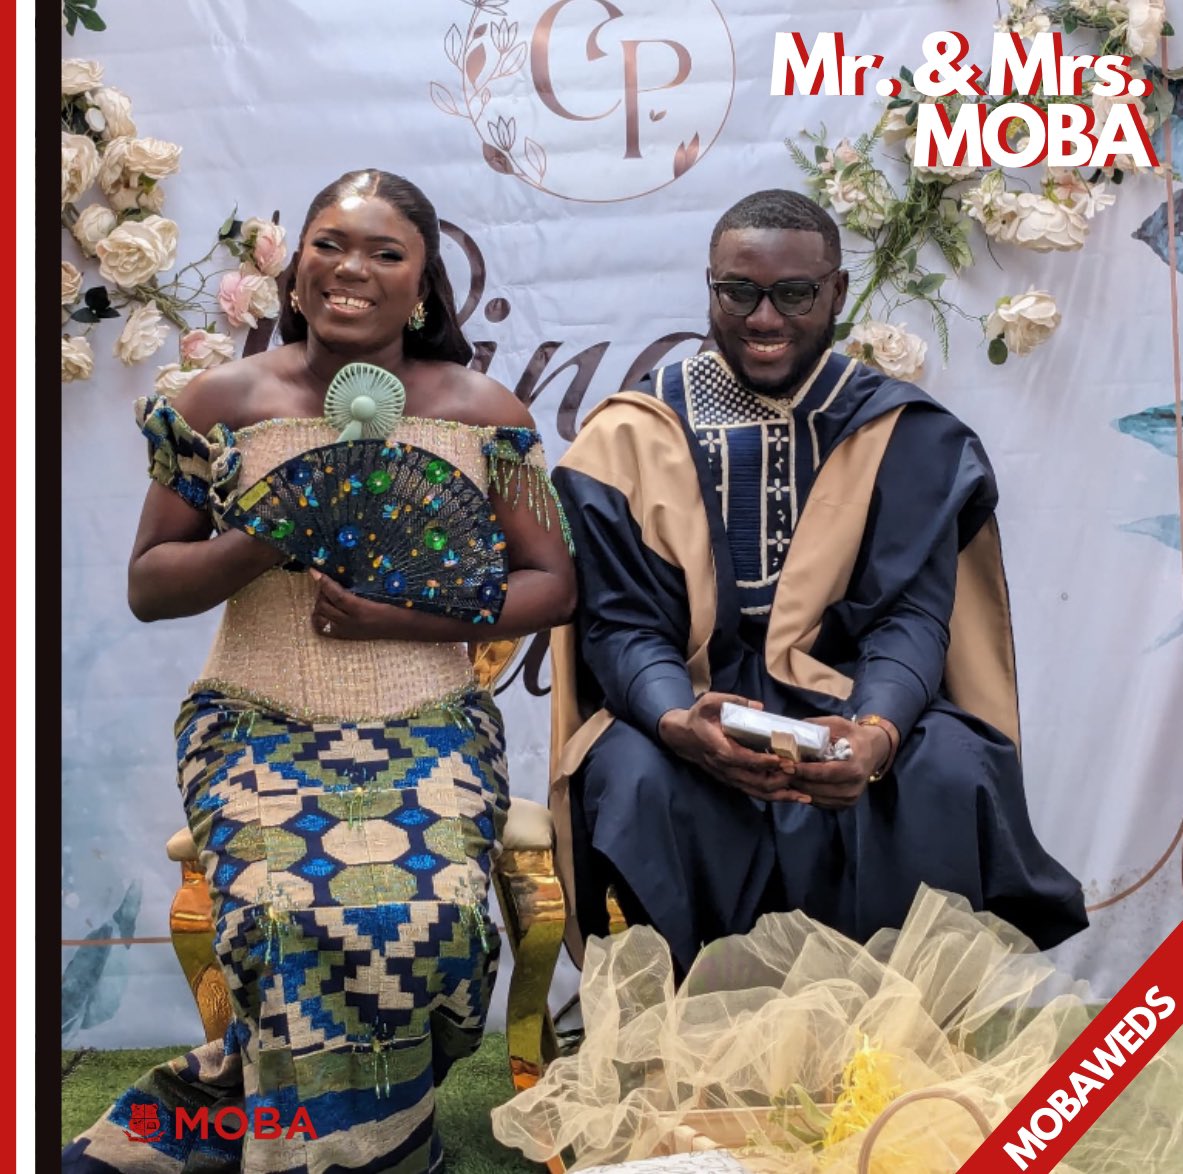 MOBA WEDDINGS ❤️

“The first duty of love is to listen.' – Paul Tillich

We wish you a happy and prosperous marriage, Mr. & Mrs. MOBA Andrew & Cindy (Aikins) Parker-Benin of the MOBA Class of 2016.

#MOBAWeddings 
#MadeInMfantsipim 
#MfantsipimSchool 
#MOBANational